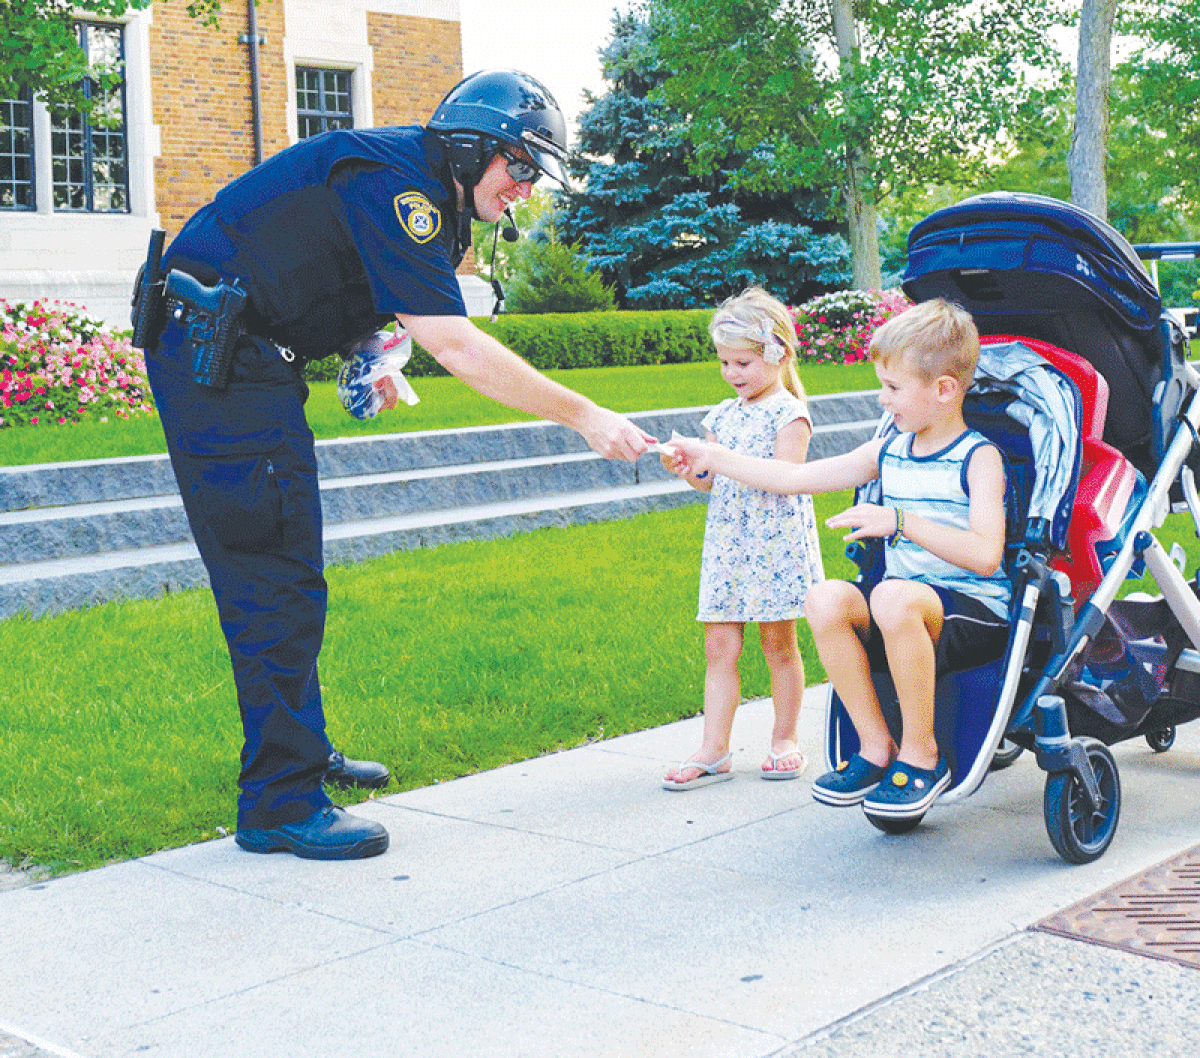  The police open house will be an opportunity for the community to meet officers and ask them questions. On July 29, the police open house will be held during the Day  On The Town.  